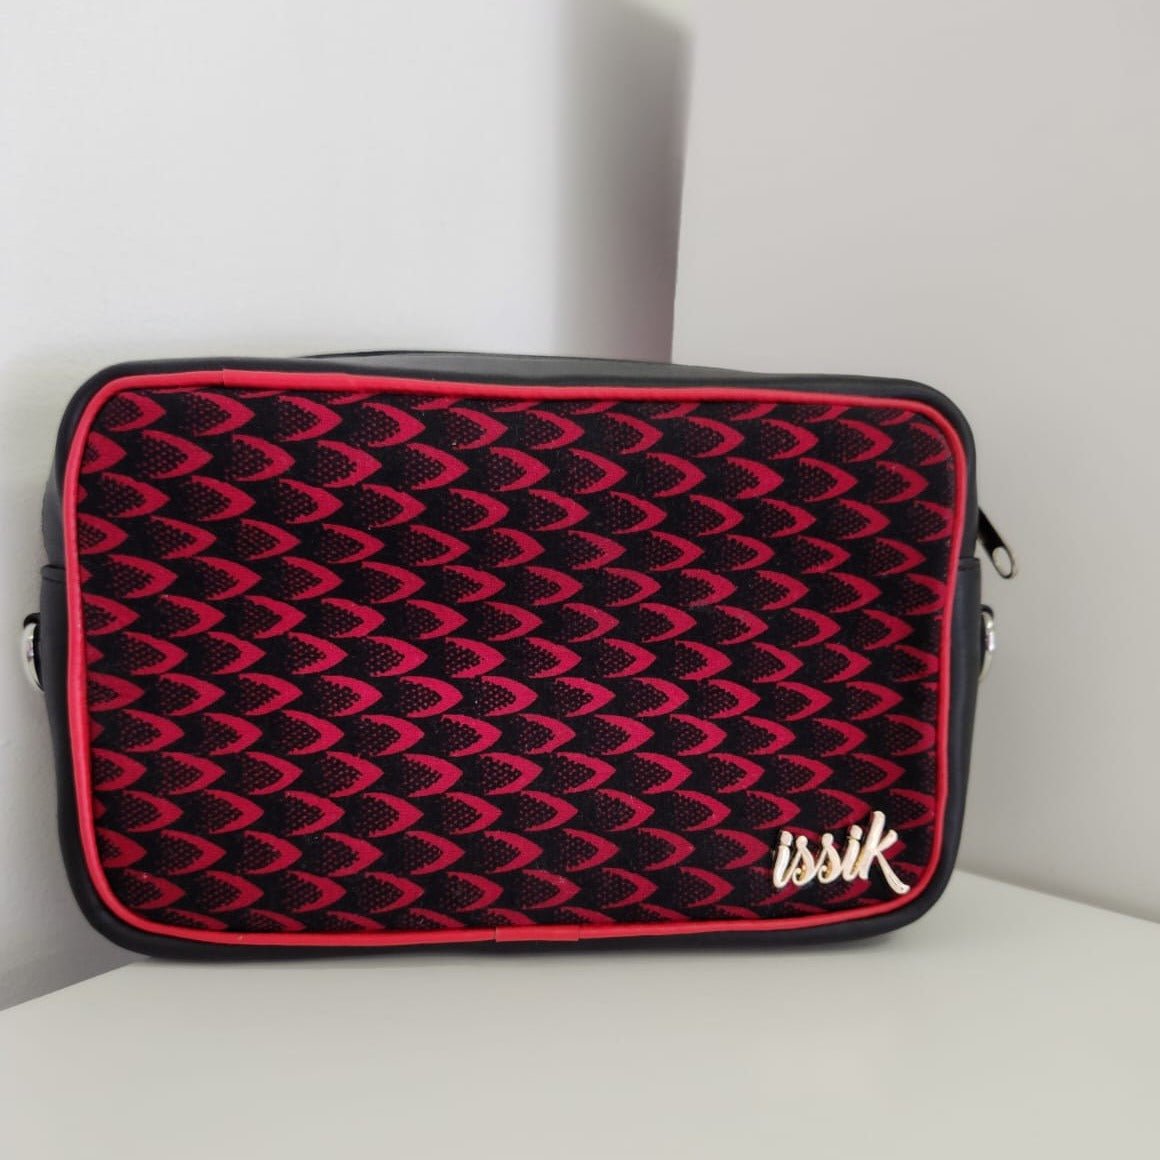 Red & Black Leather Cross bag - House of Prints